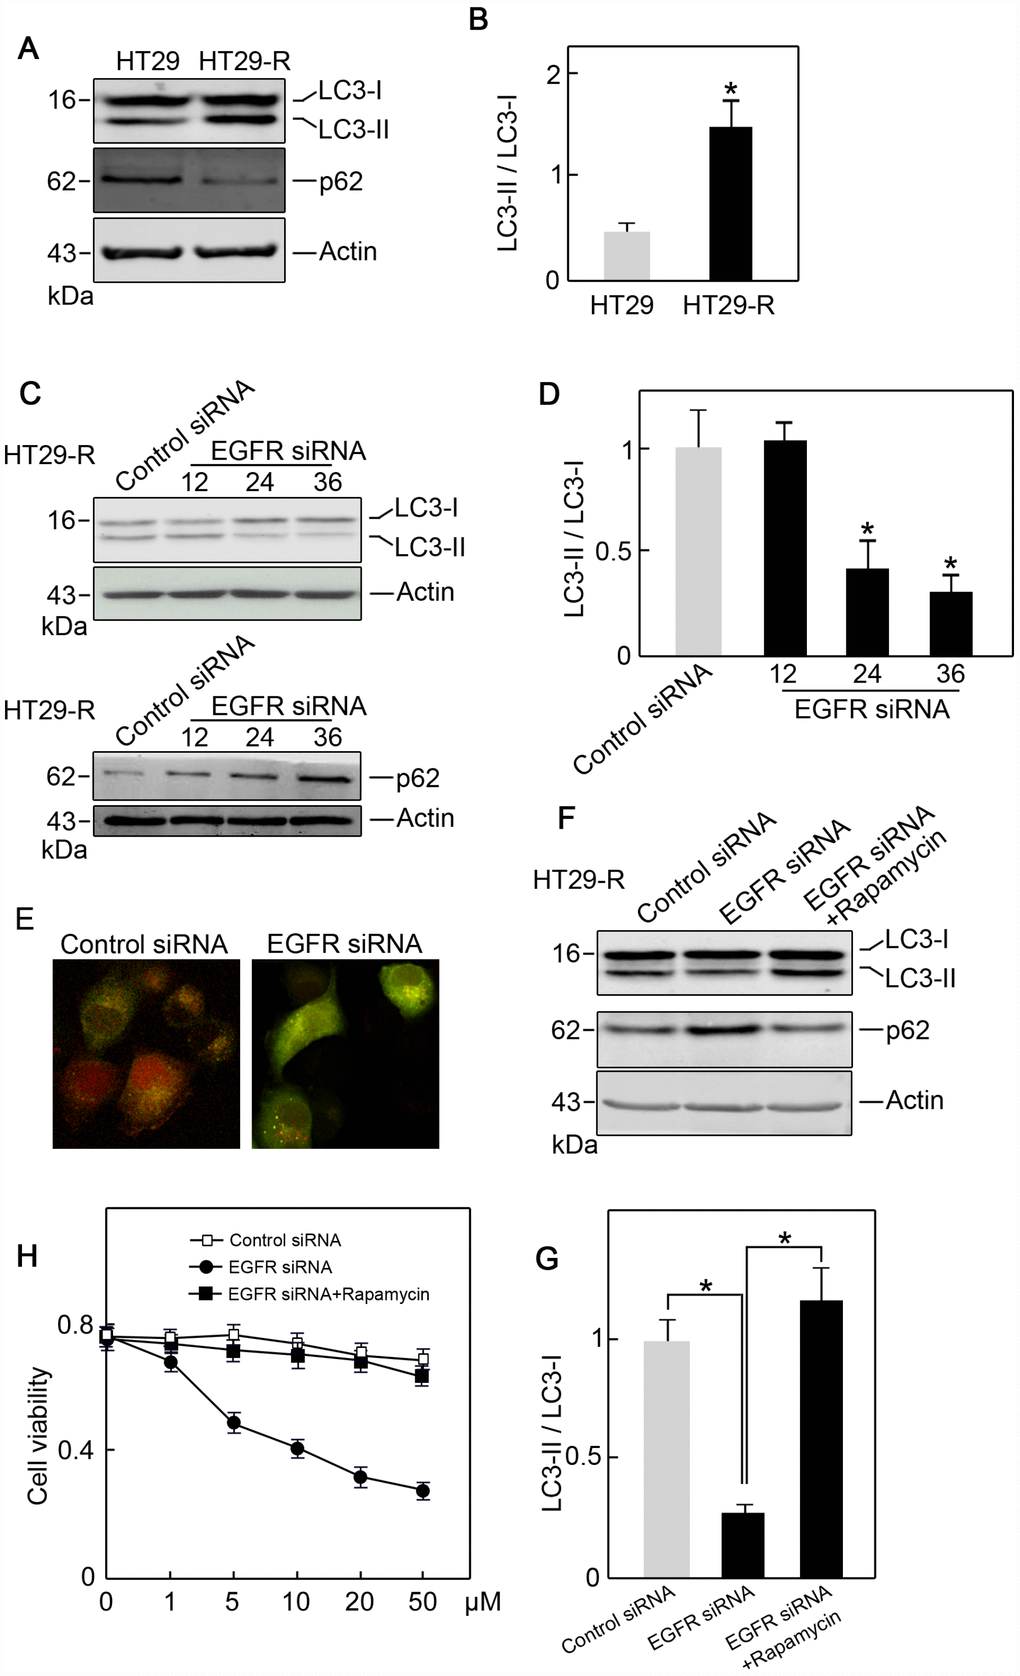 EGFR contributes to 5-FU resistance in colon cancer cells through autophagy. (A) Autophagy induction was increased in HT29-R cells compared with parental HT29 cells (n=3). (B) Conversion of LC3-I to LC3-II was increased in HT29-R cells compared with parental HT29 cells (n=3, *P C) Knockdown of EGFR in HT29-R cells impaired autophagy flux (n=3). (D) Knockdown of EGFR in HT29-R cells inhibited the conversion of LC3-I to LC3-II (n=3, *P E) Fluorescence images of mRFP-GFP-LC3 in HT29-R cells transfected with control siRNA or EGFR siRNA (200× magnification). (F) Rapamycin reversed autophagy inhibition induced by EGFR knockdown in HT29-R cells (n=3). (G) Rapamycin reversed the inhibition of LC3-I to LC3-II conversion caused by EGFR knockdown (n=3, *P 